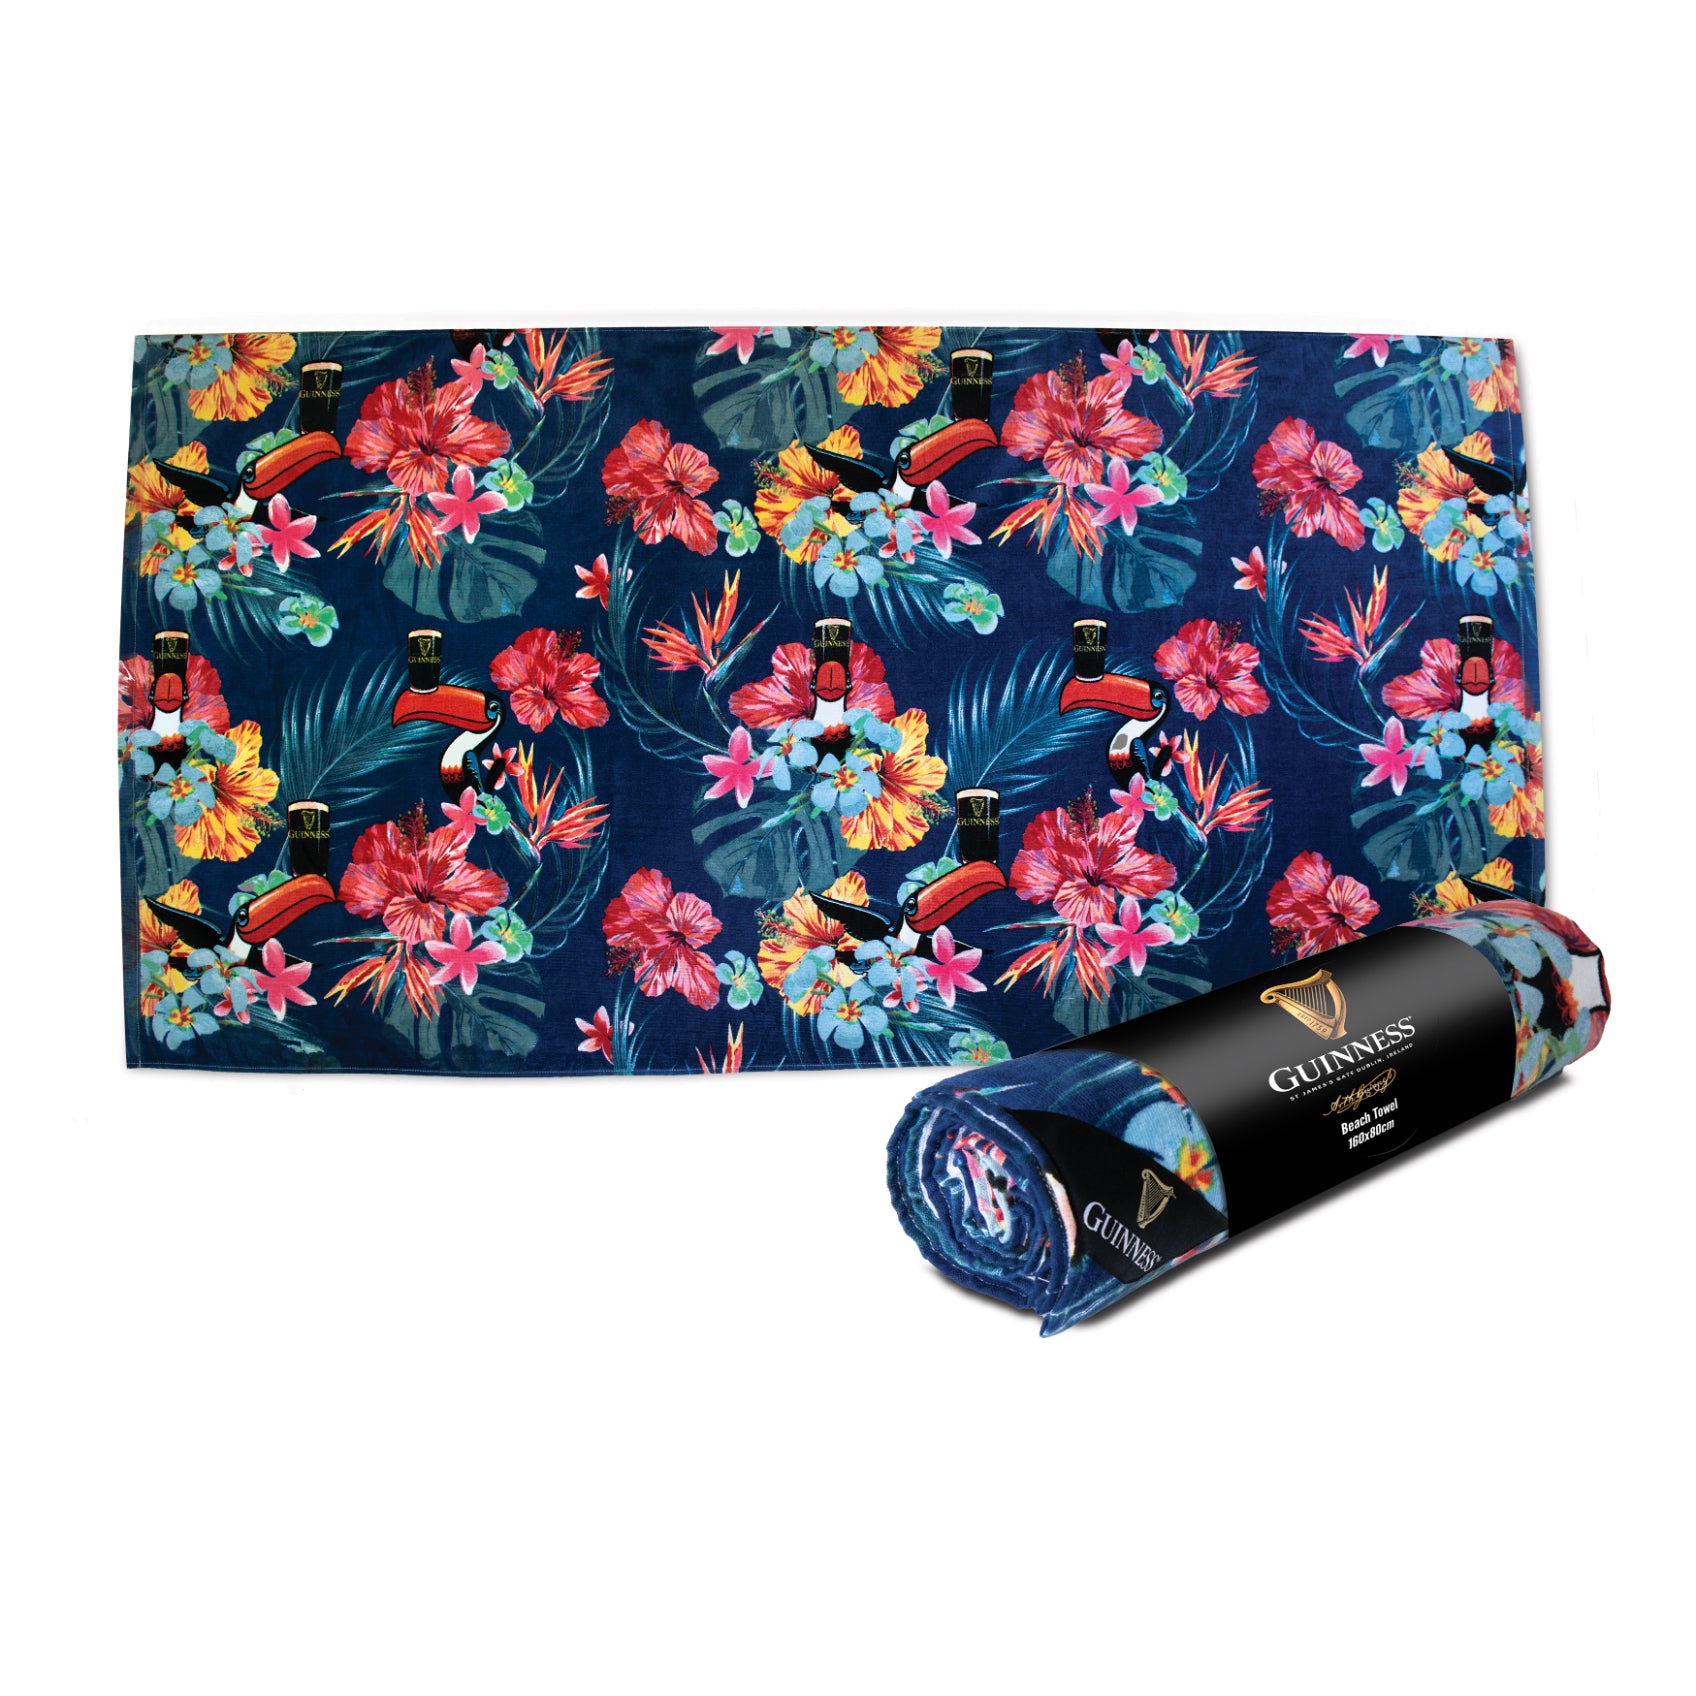 A rolled-up Guinness Toucan Hawaiian Beach Towel next to its unrolled version displaying a vibrant tropical print.